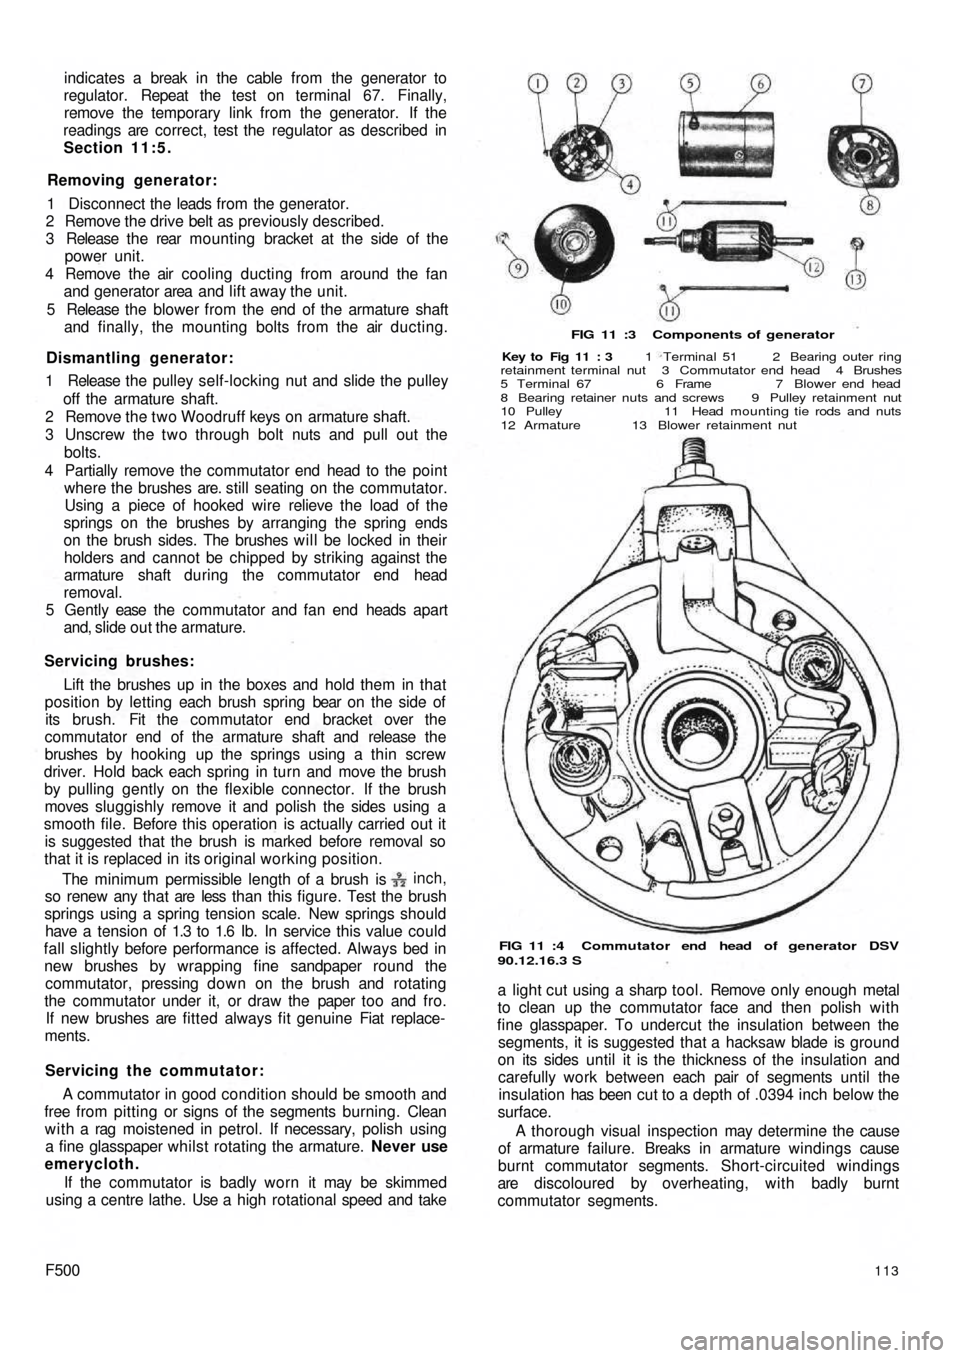 FIAT 500 1957 1.G Workshop Manual indicates a  break in the cable from the generator to
regulator. Repeat the test on terminal 67.  Finally,
remove the temporary link from  the generator. If the
readings are correct, test the regulato